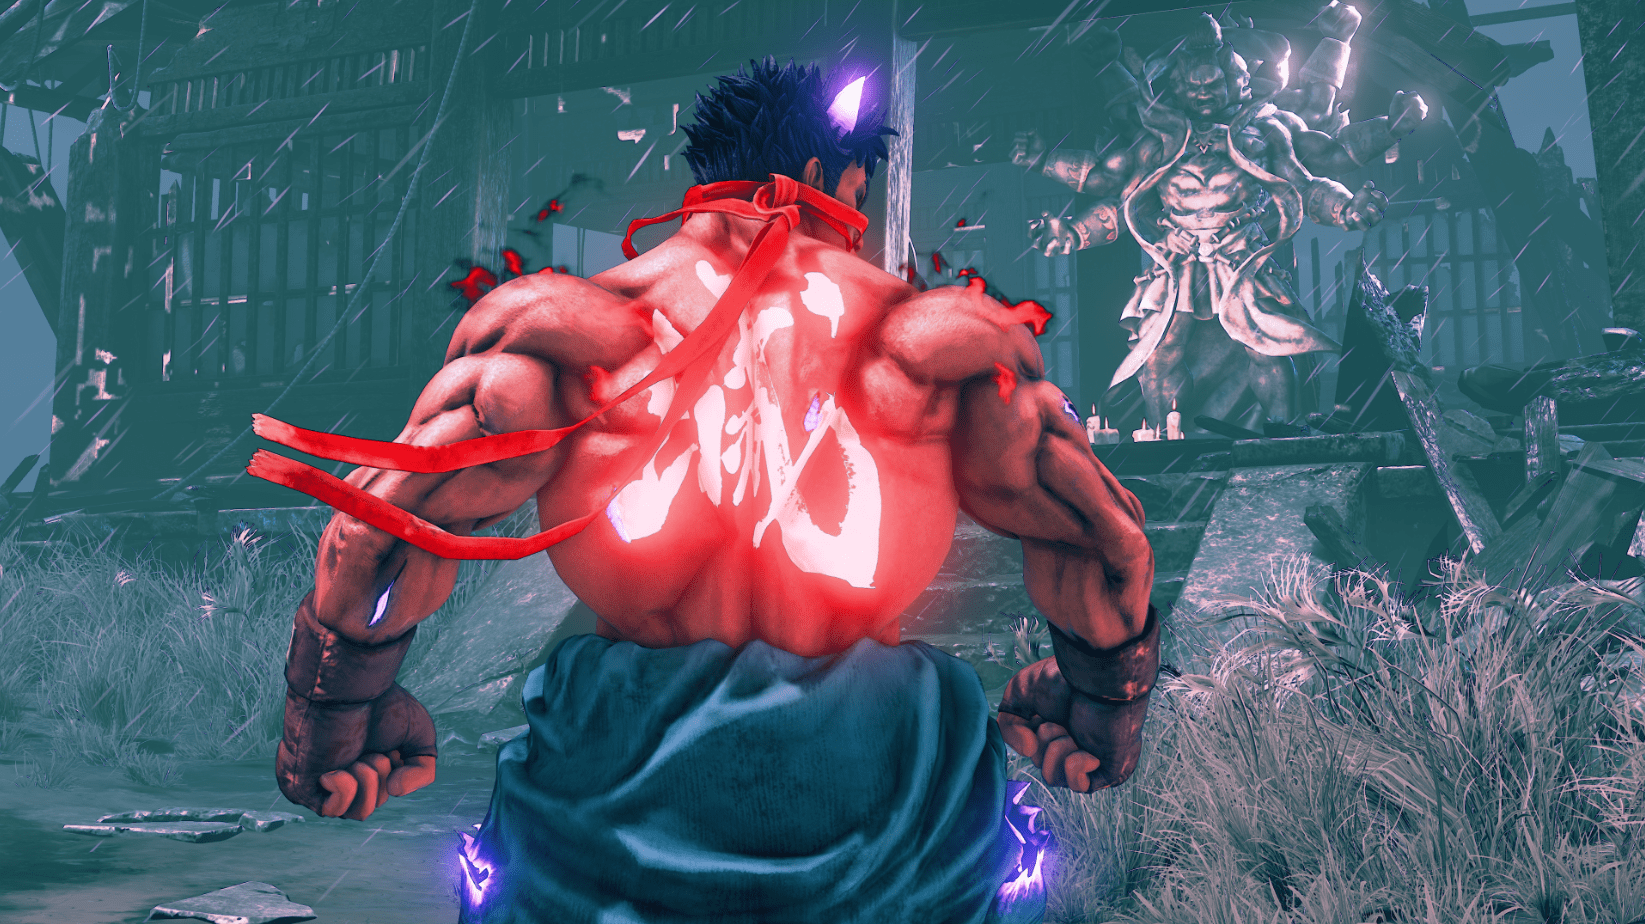 Street Fighter V: Arcade Edition Welcomes Kage, the Newest World Warrior